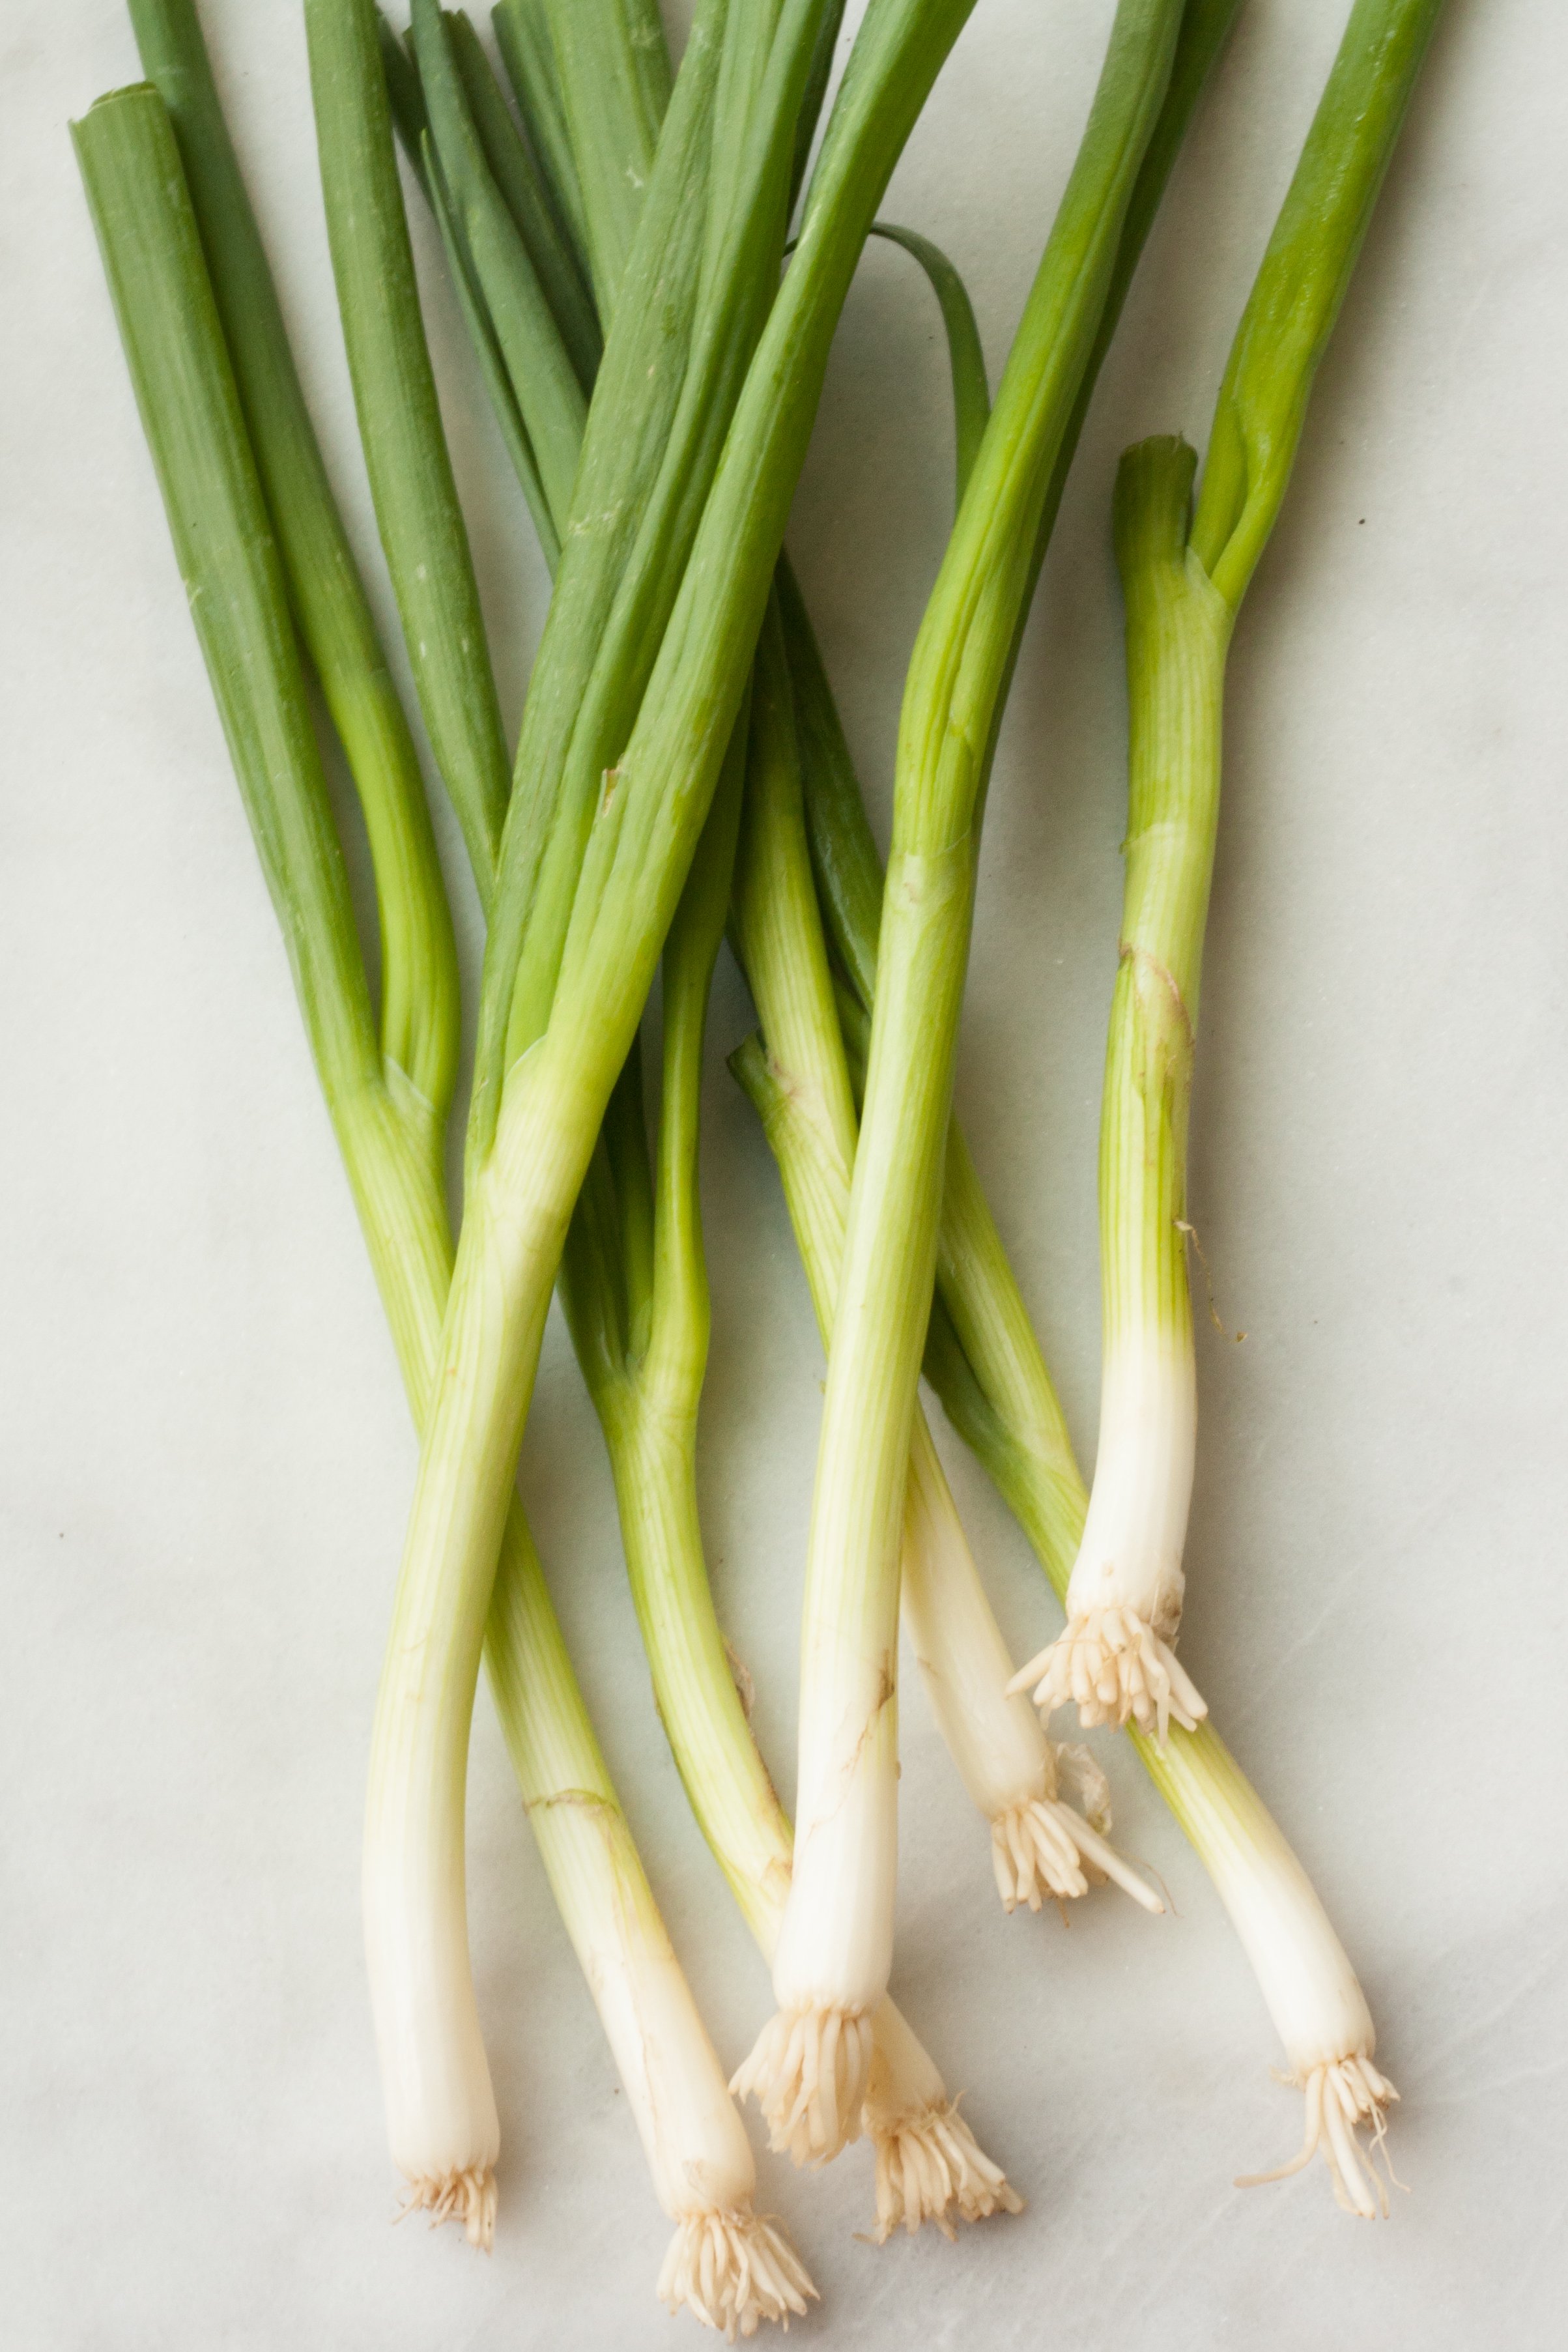 When to Use the White Part Versus the Green Part of a Scallion | Kitchn